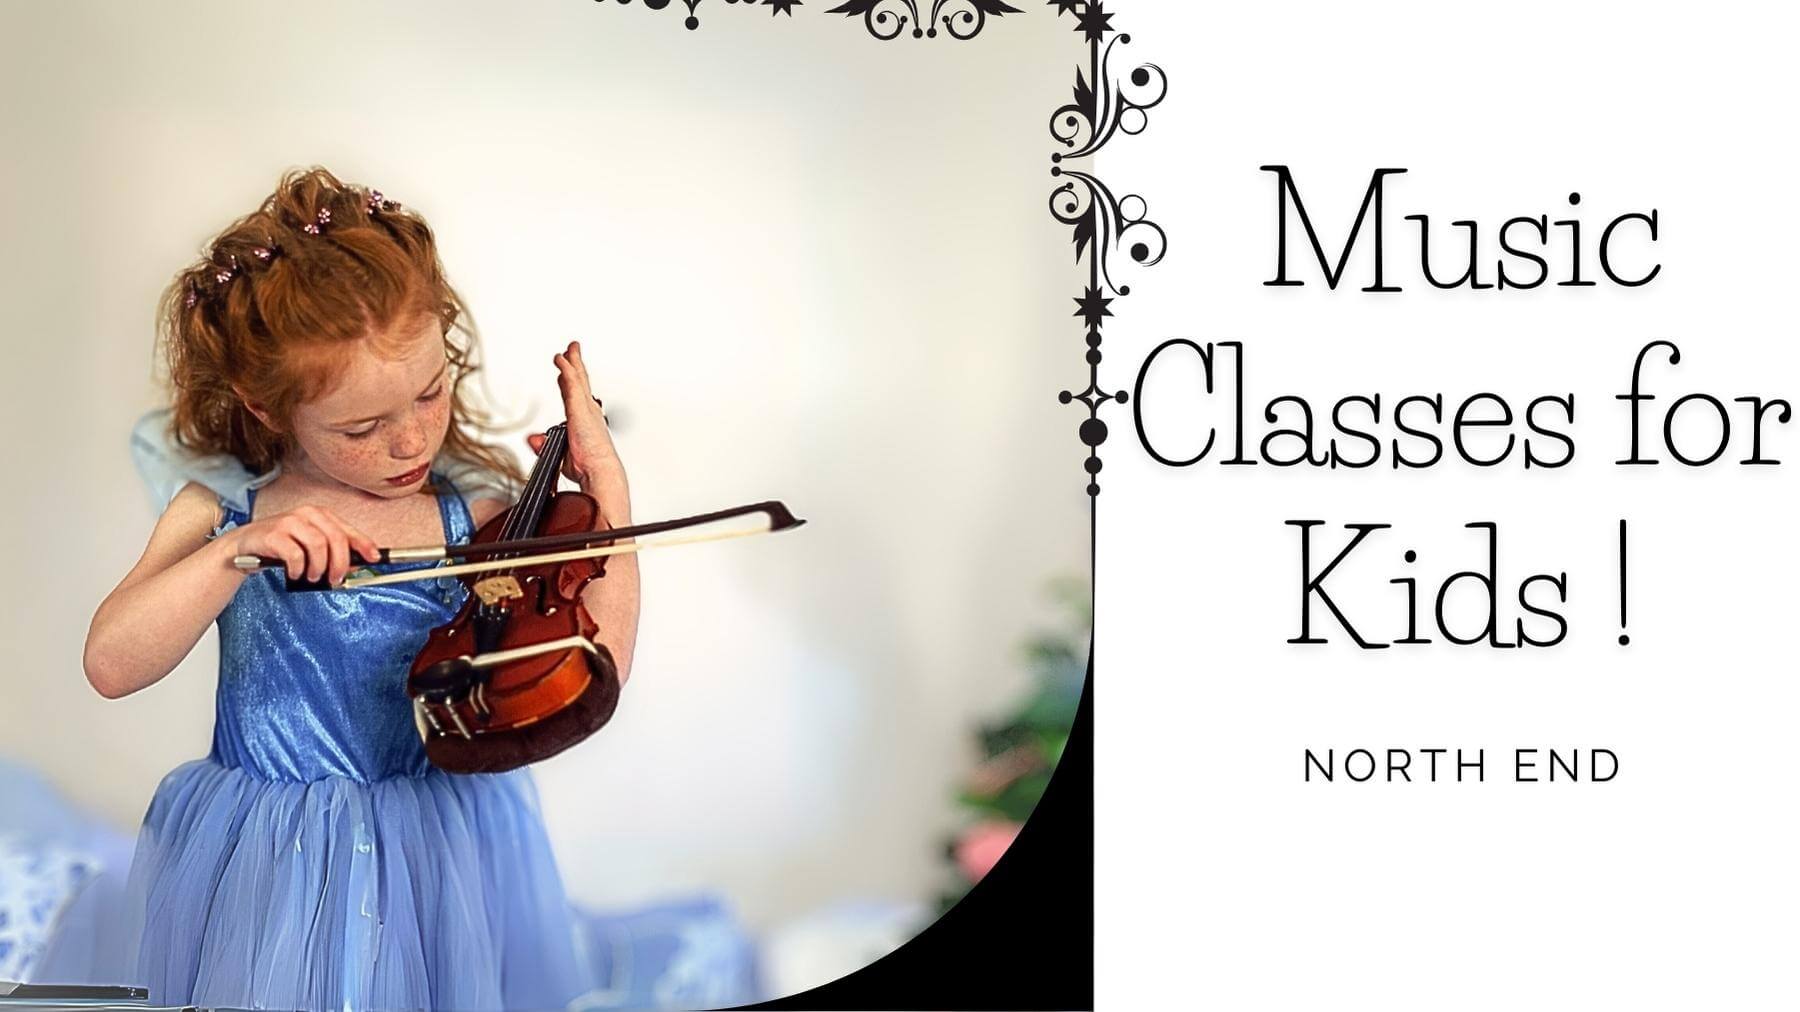 Music Classes for Kids in North End, Massachusetts